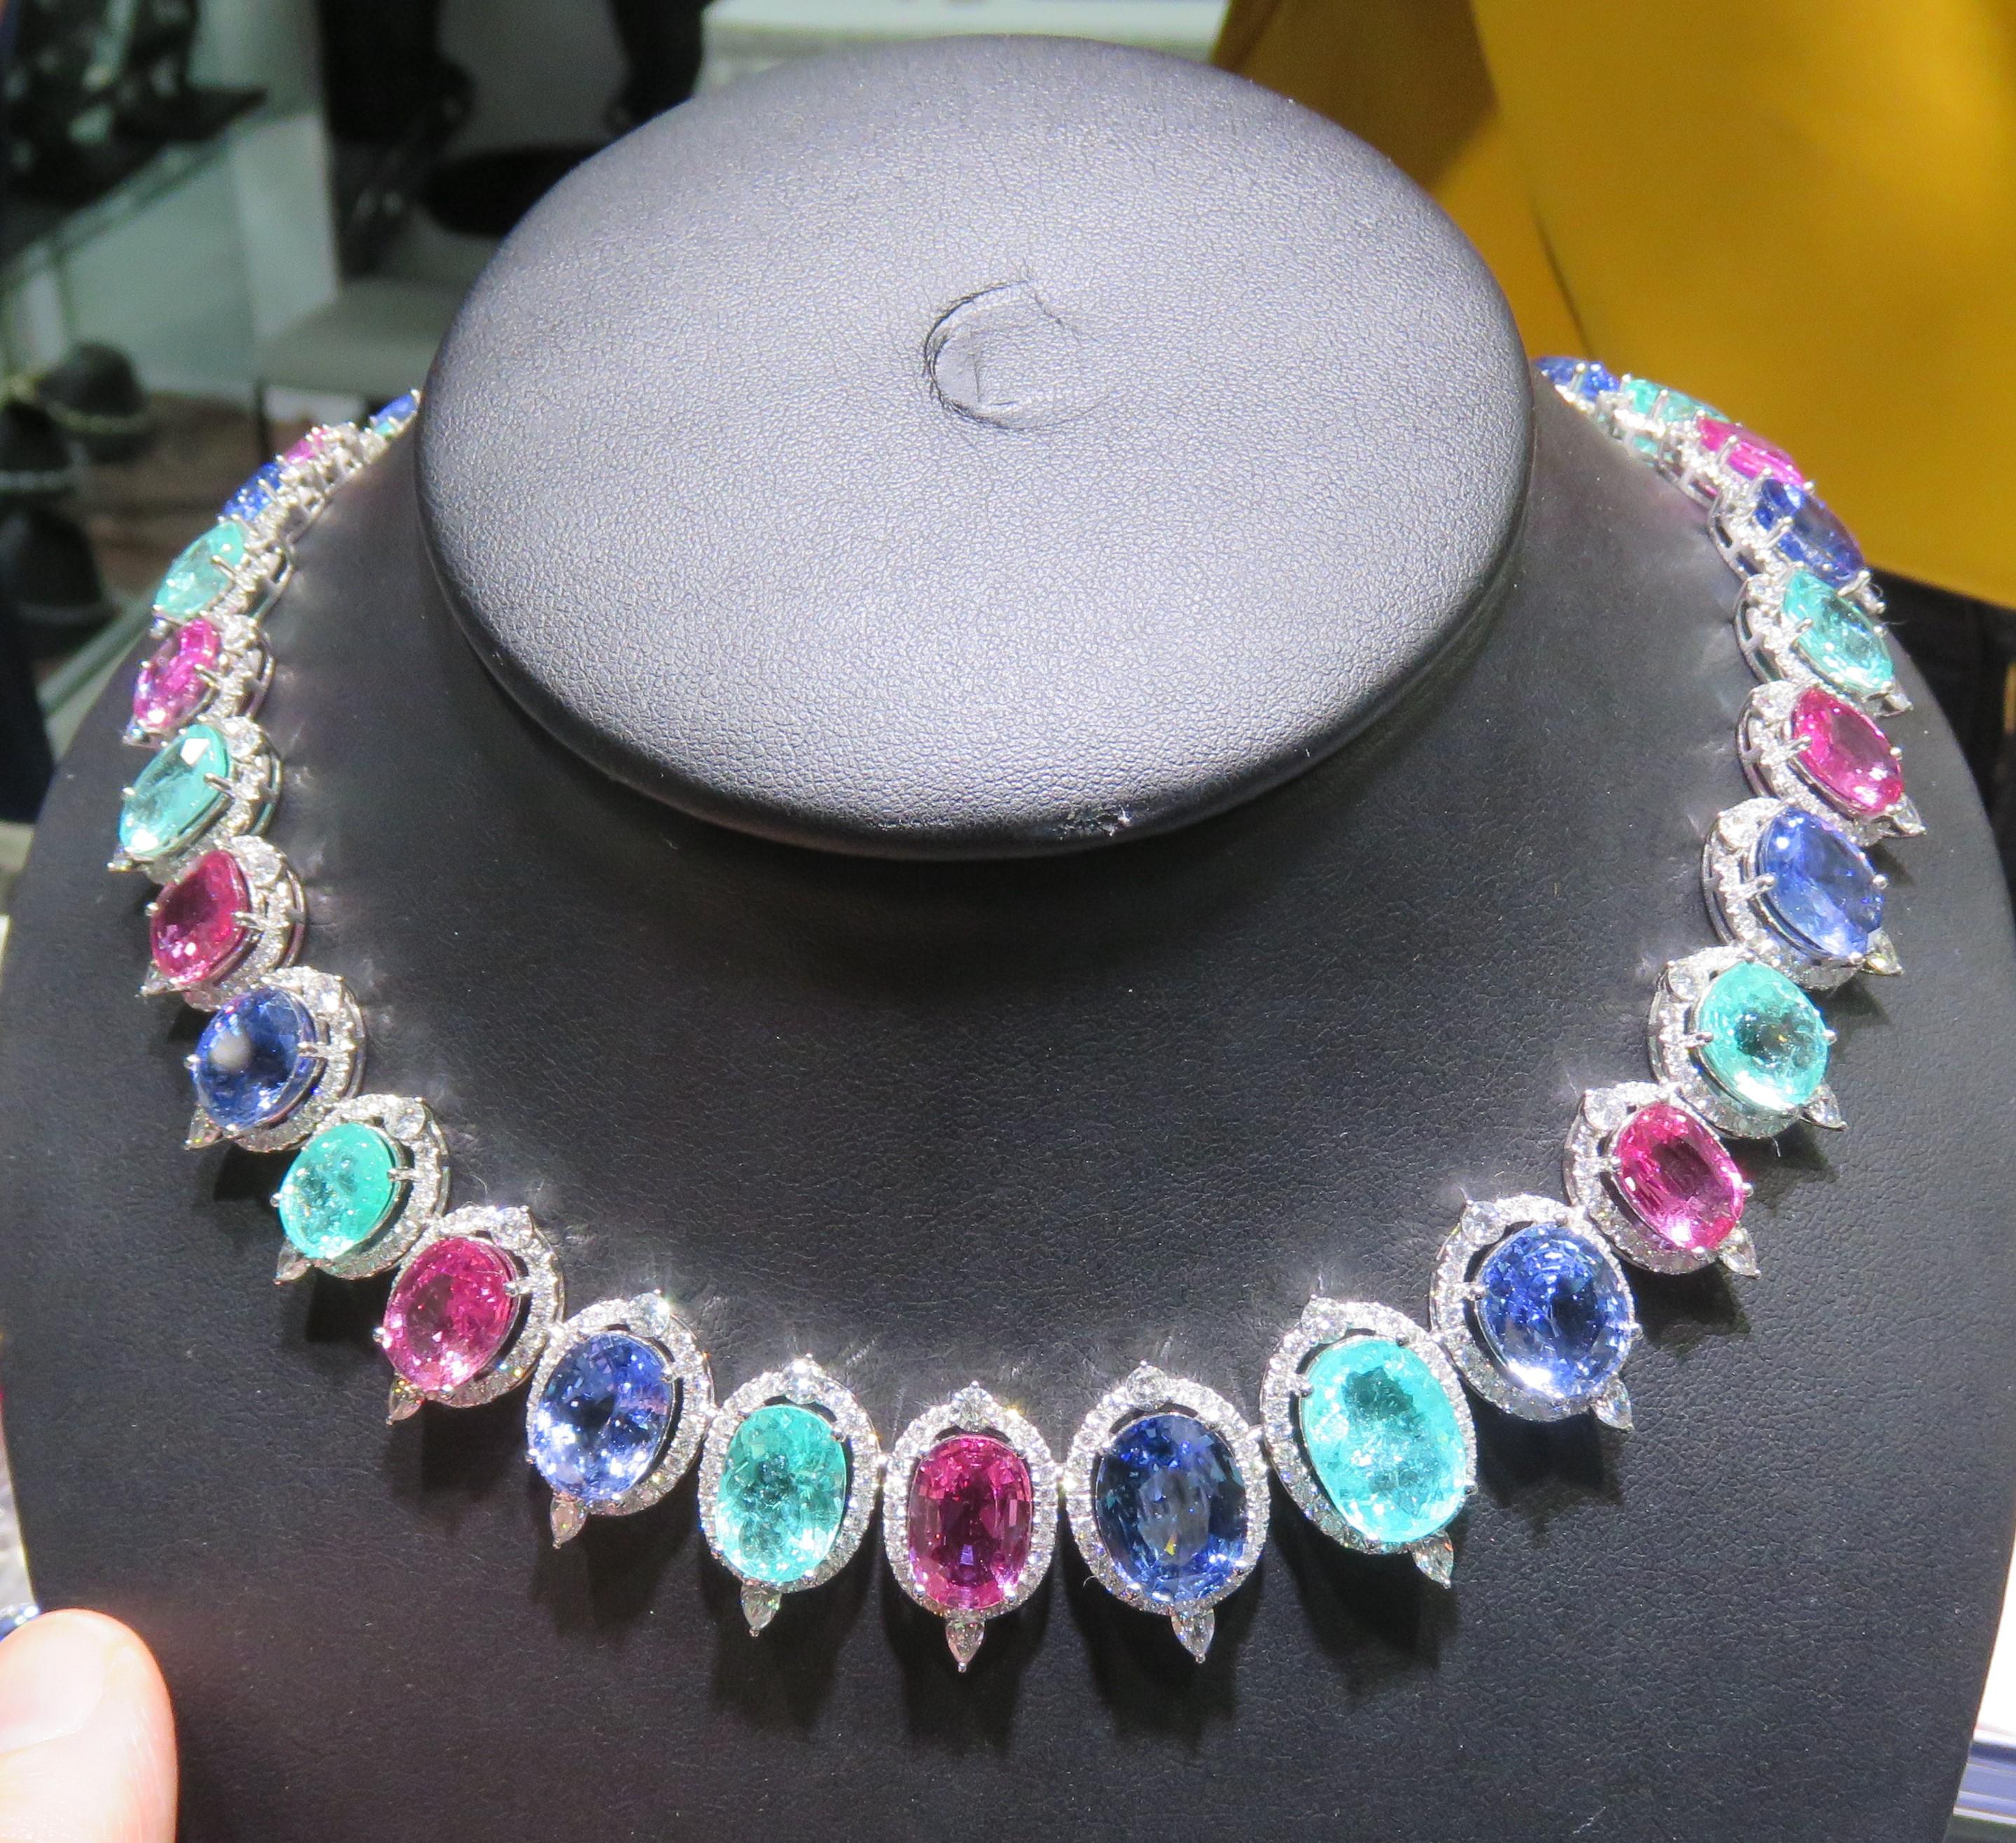 The Following Items we are offering is a Rare Important Gorgeous 18KT White Gold Exquisite Glittering Paraiba Tourmaline Purple Sapphire Blue Sapphire Necklace!!!! Necklace features Outstanding Shimmering Gorgeous Extremely Rare Fancy Oval Cut Large